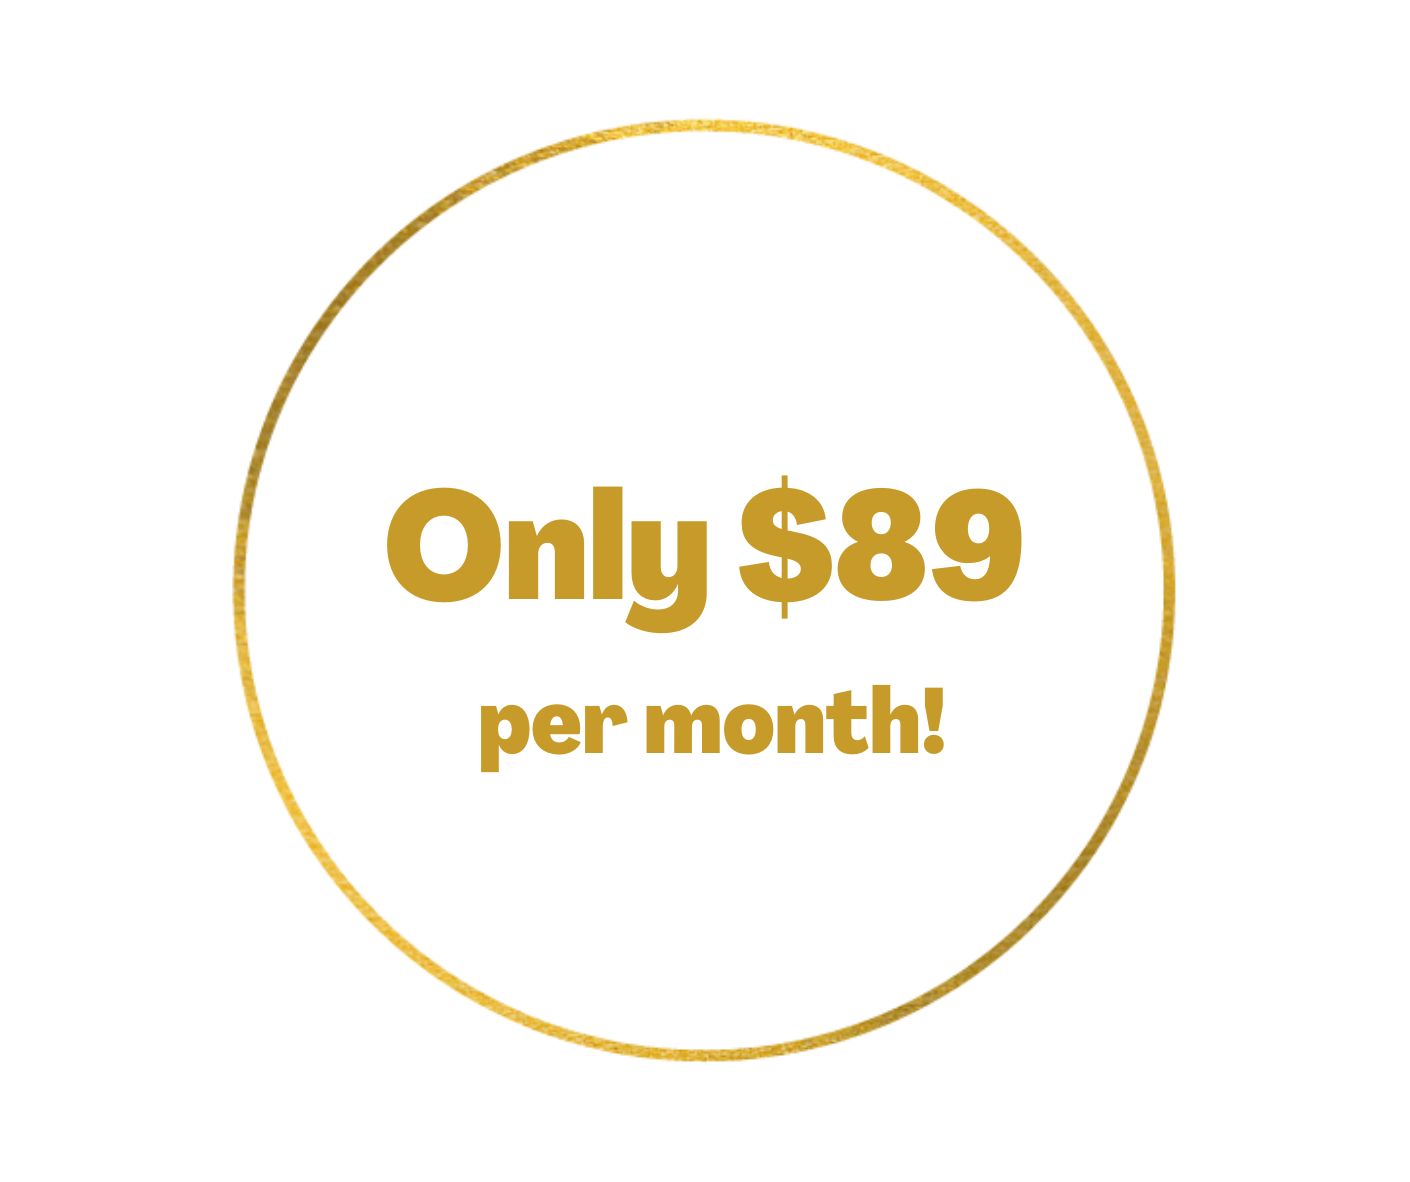 Only $89 per month! (1)